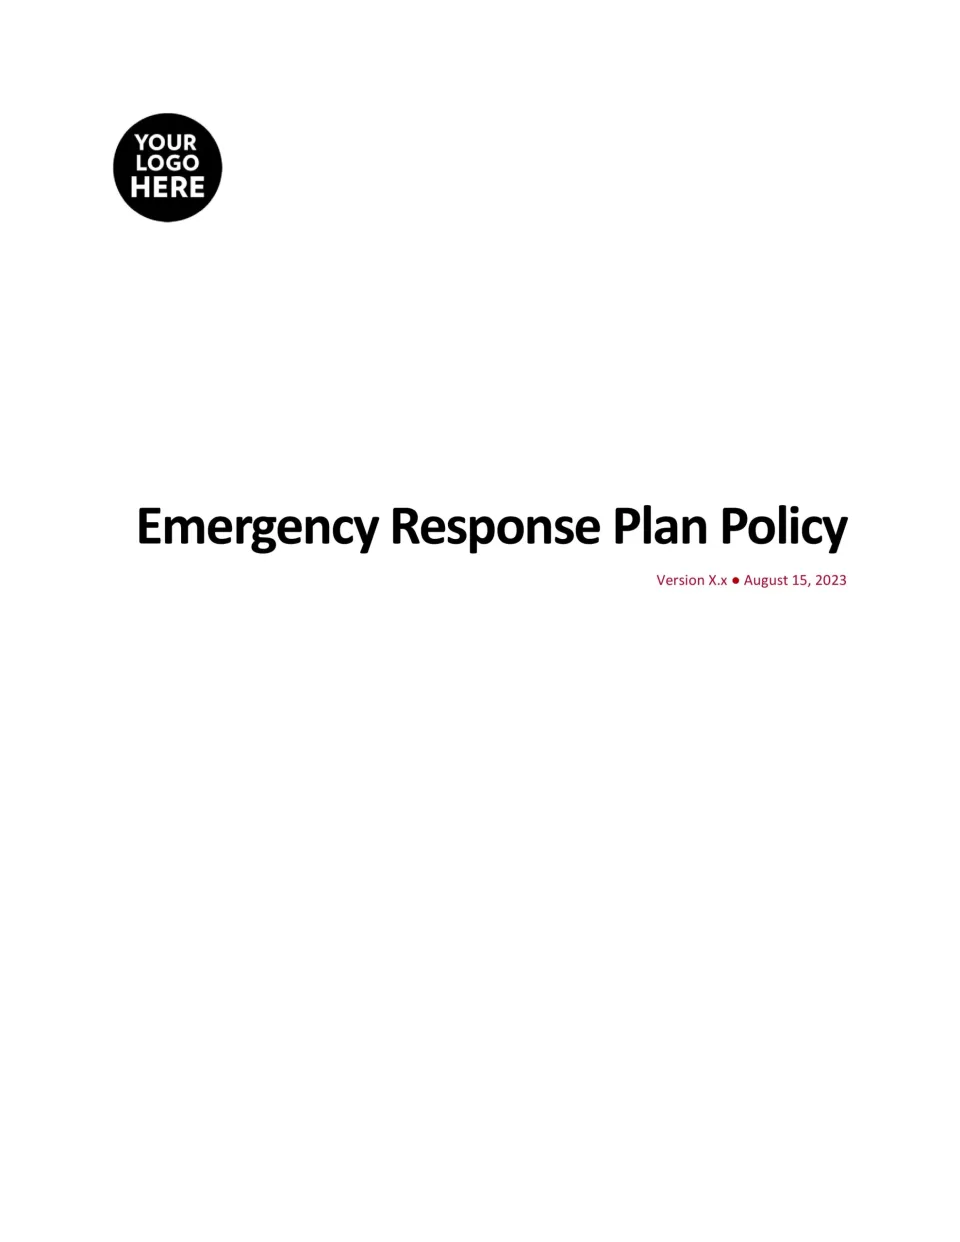 0. Emergency Response Plan Policy Template